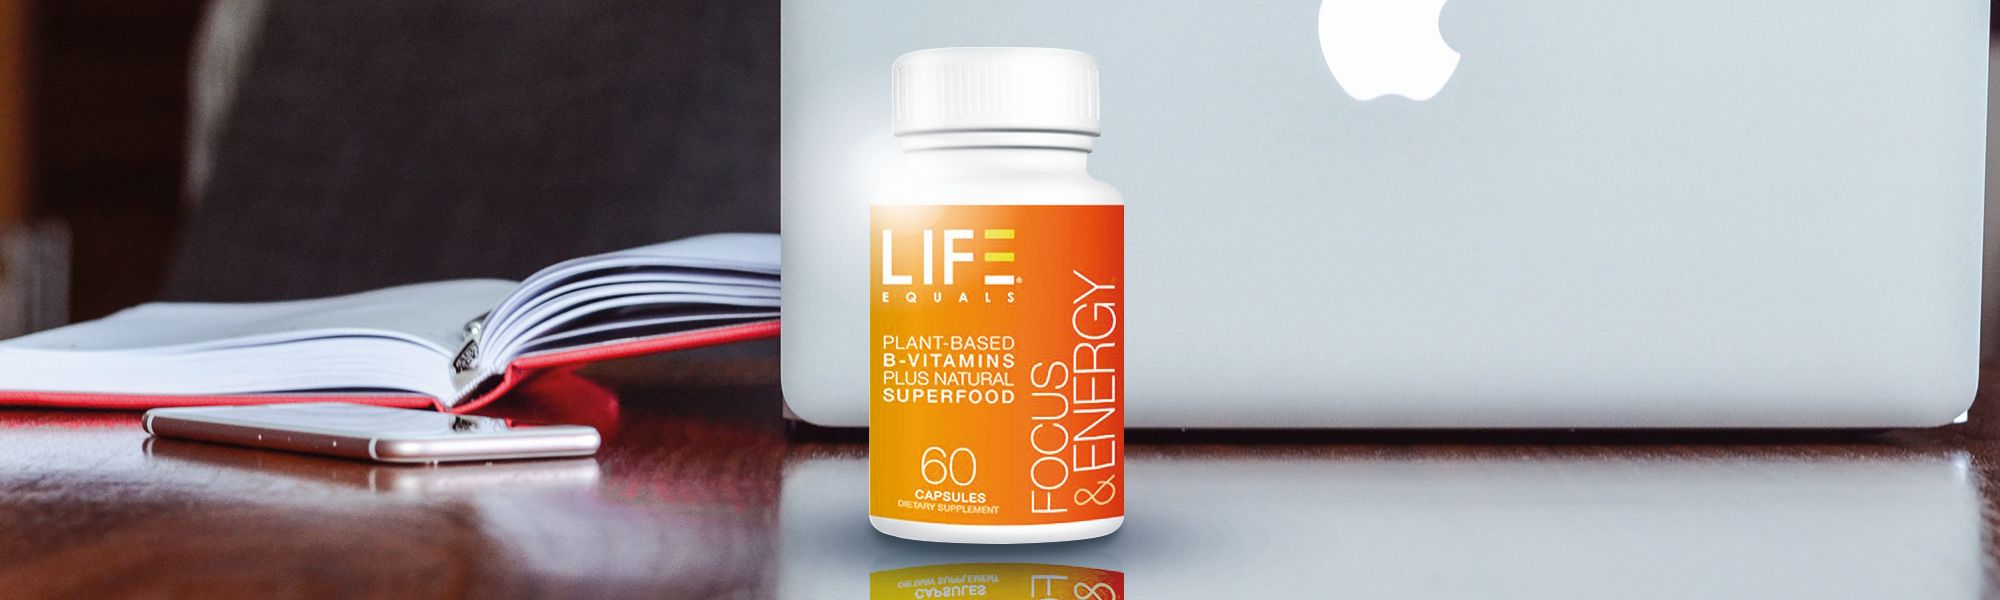 Life Equals Focus and Energy Review